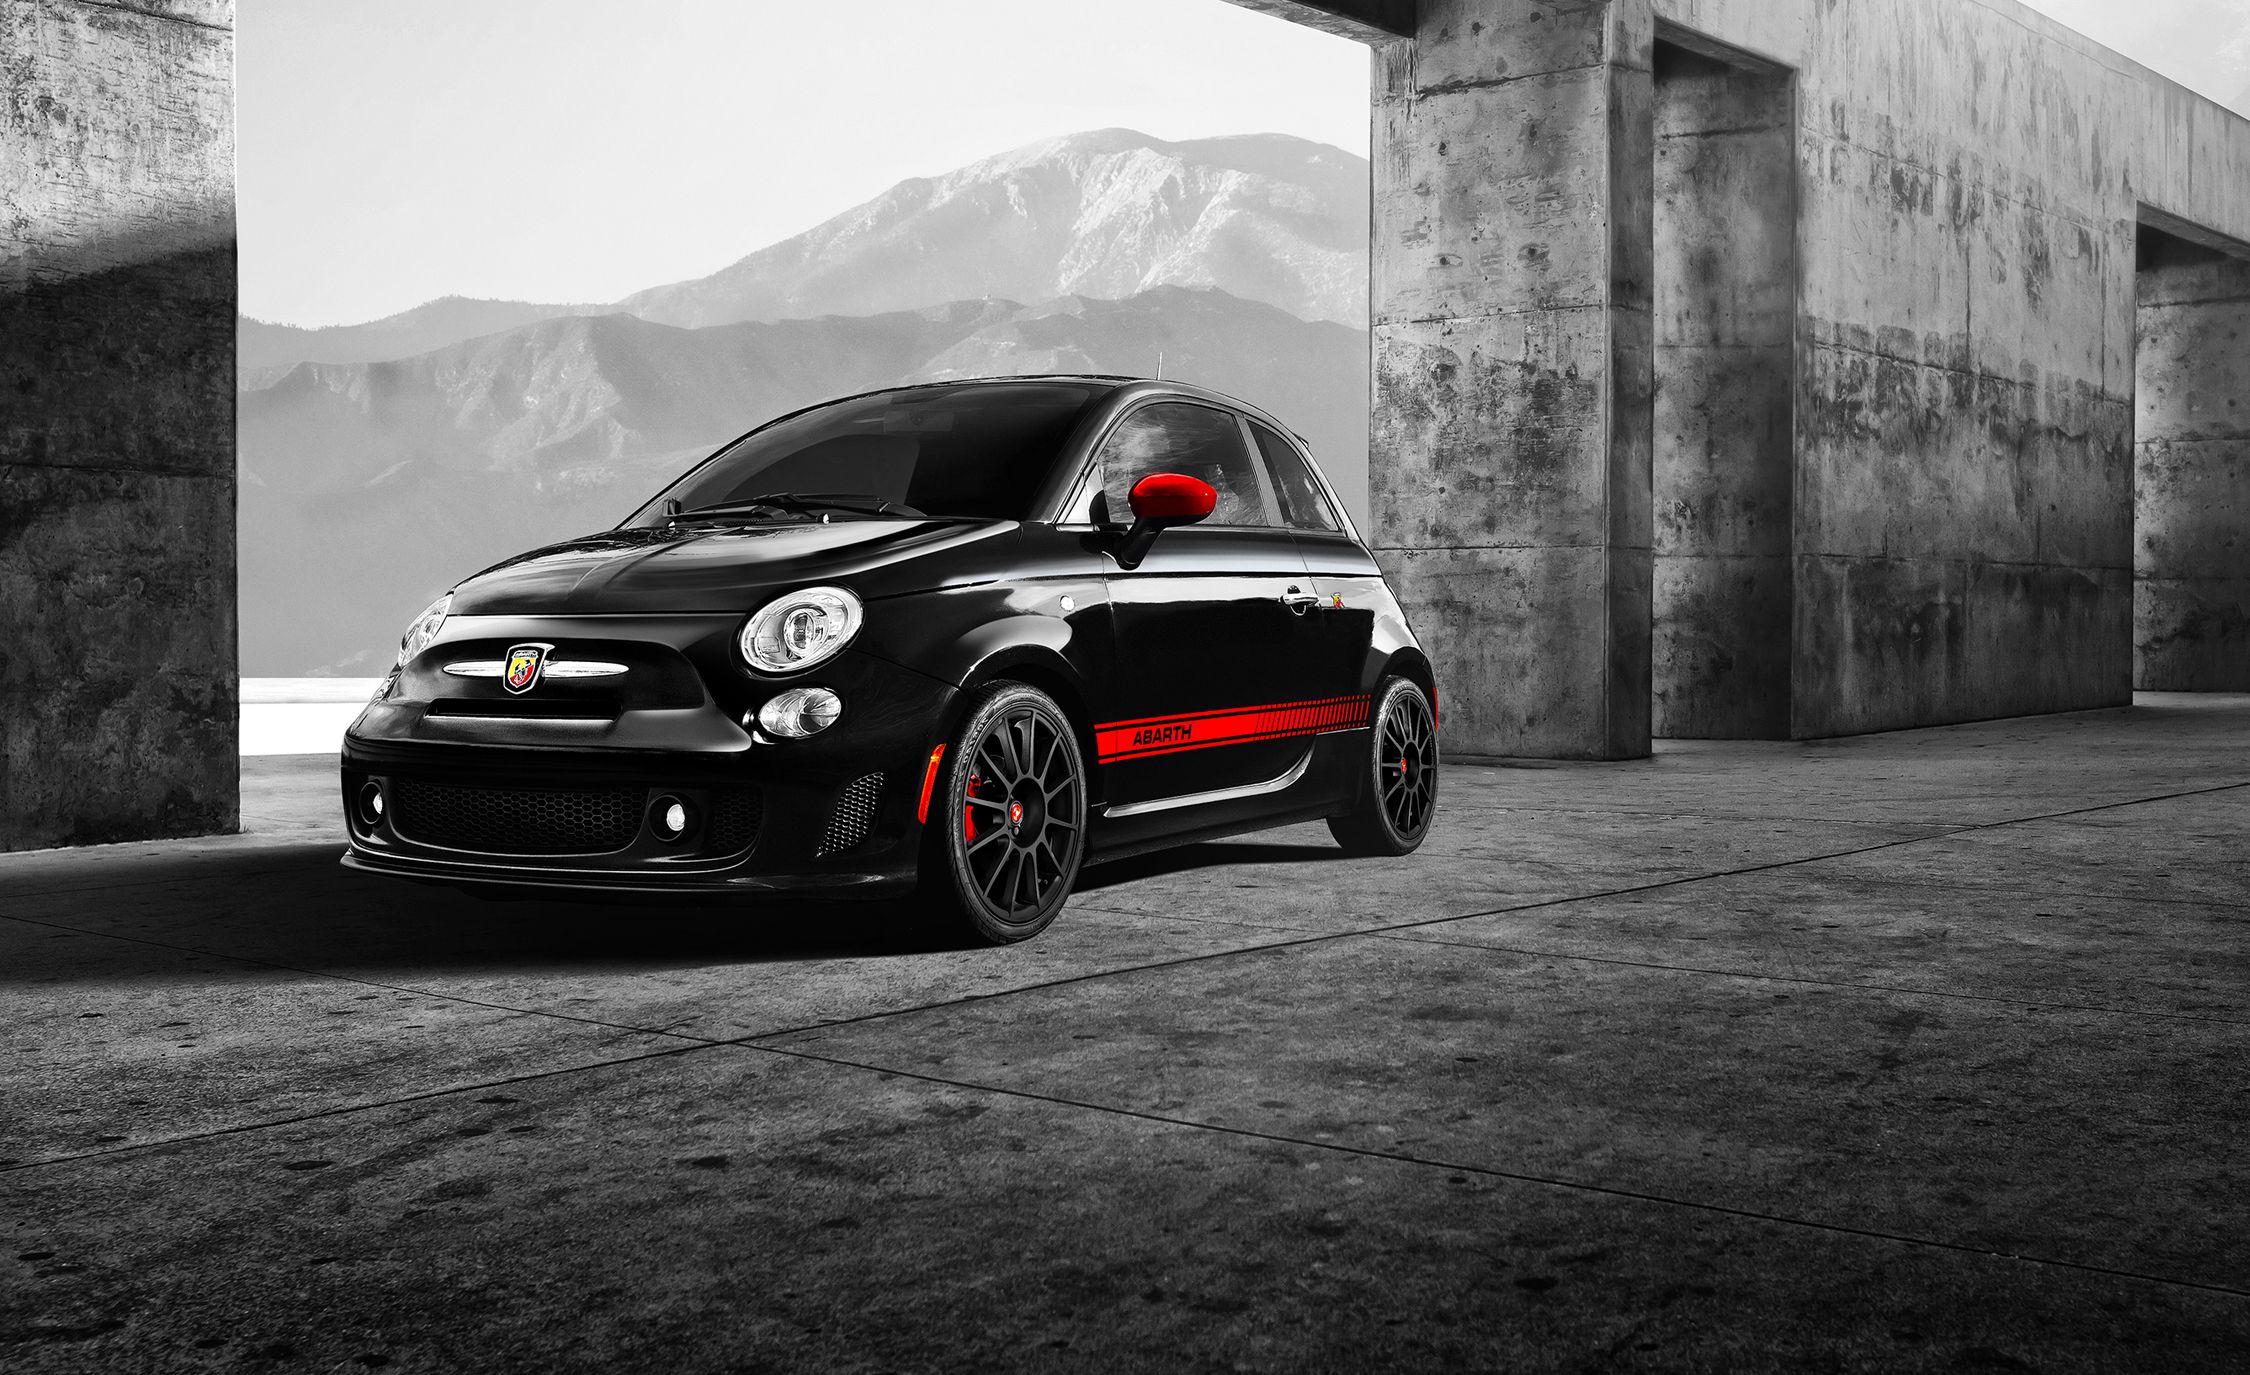 Fiat 500 Abarth 595 Competizione On Road Price (Petrol), Features